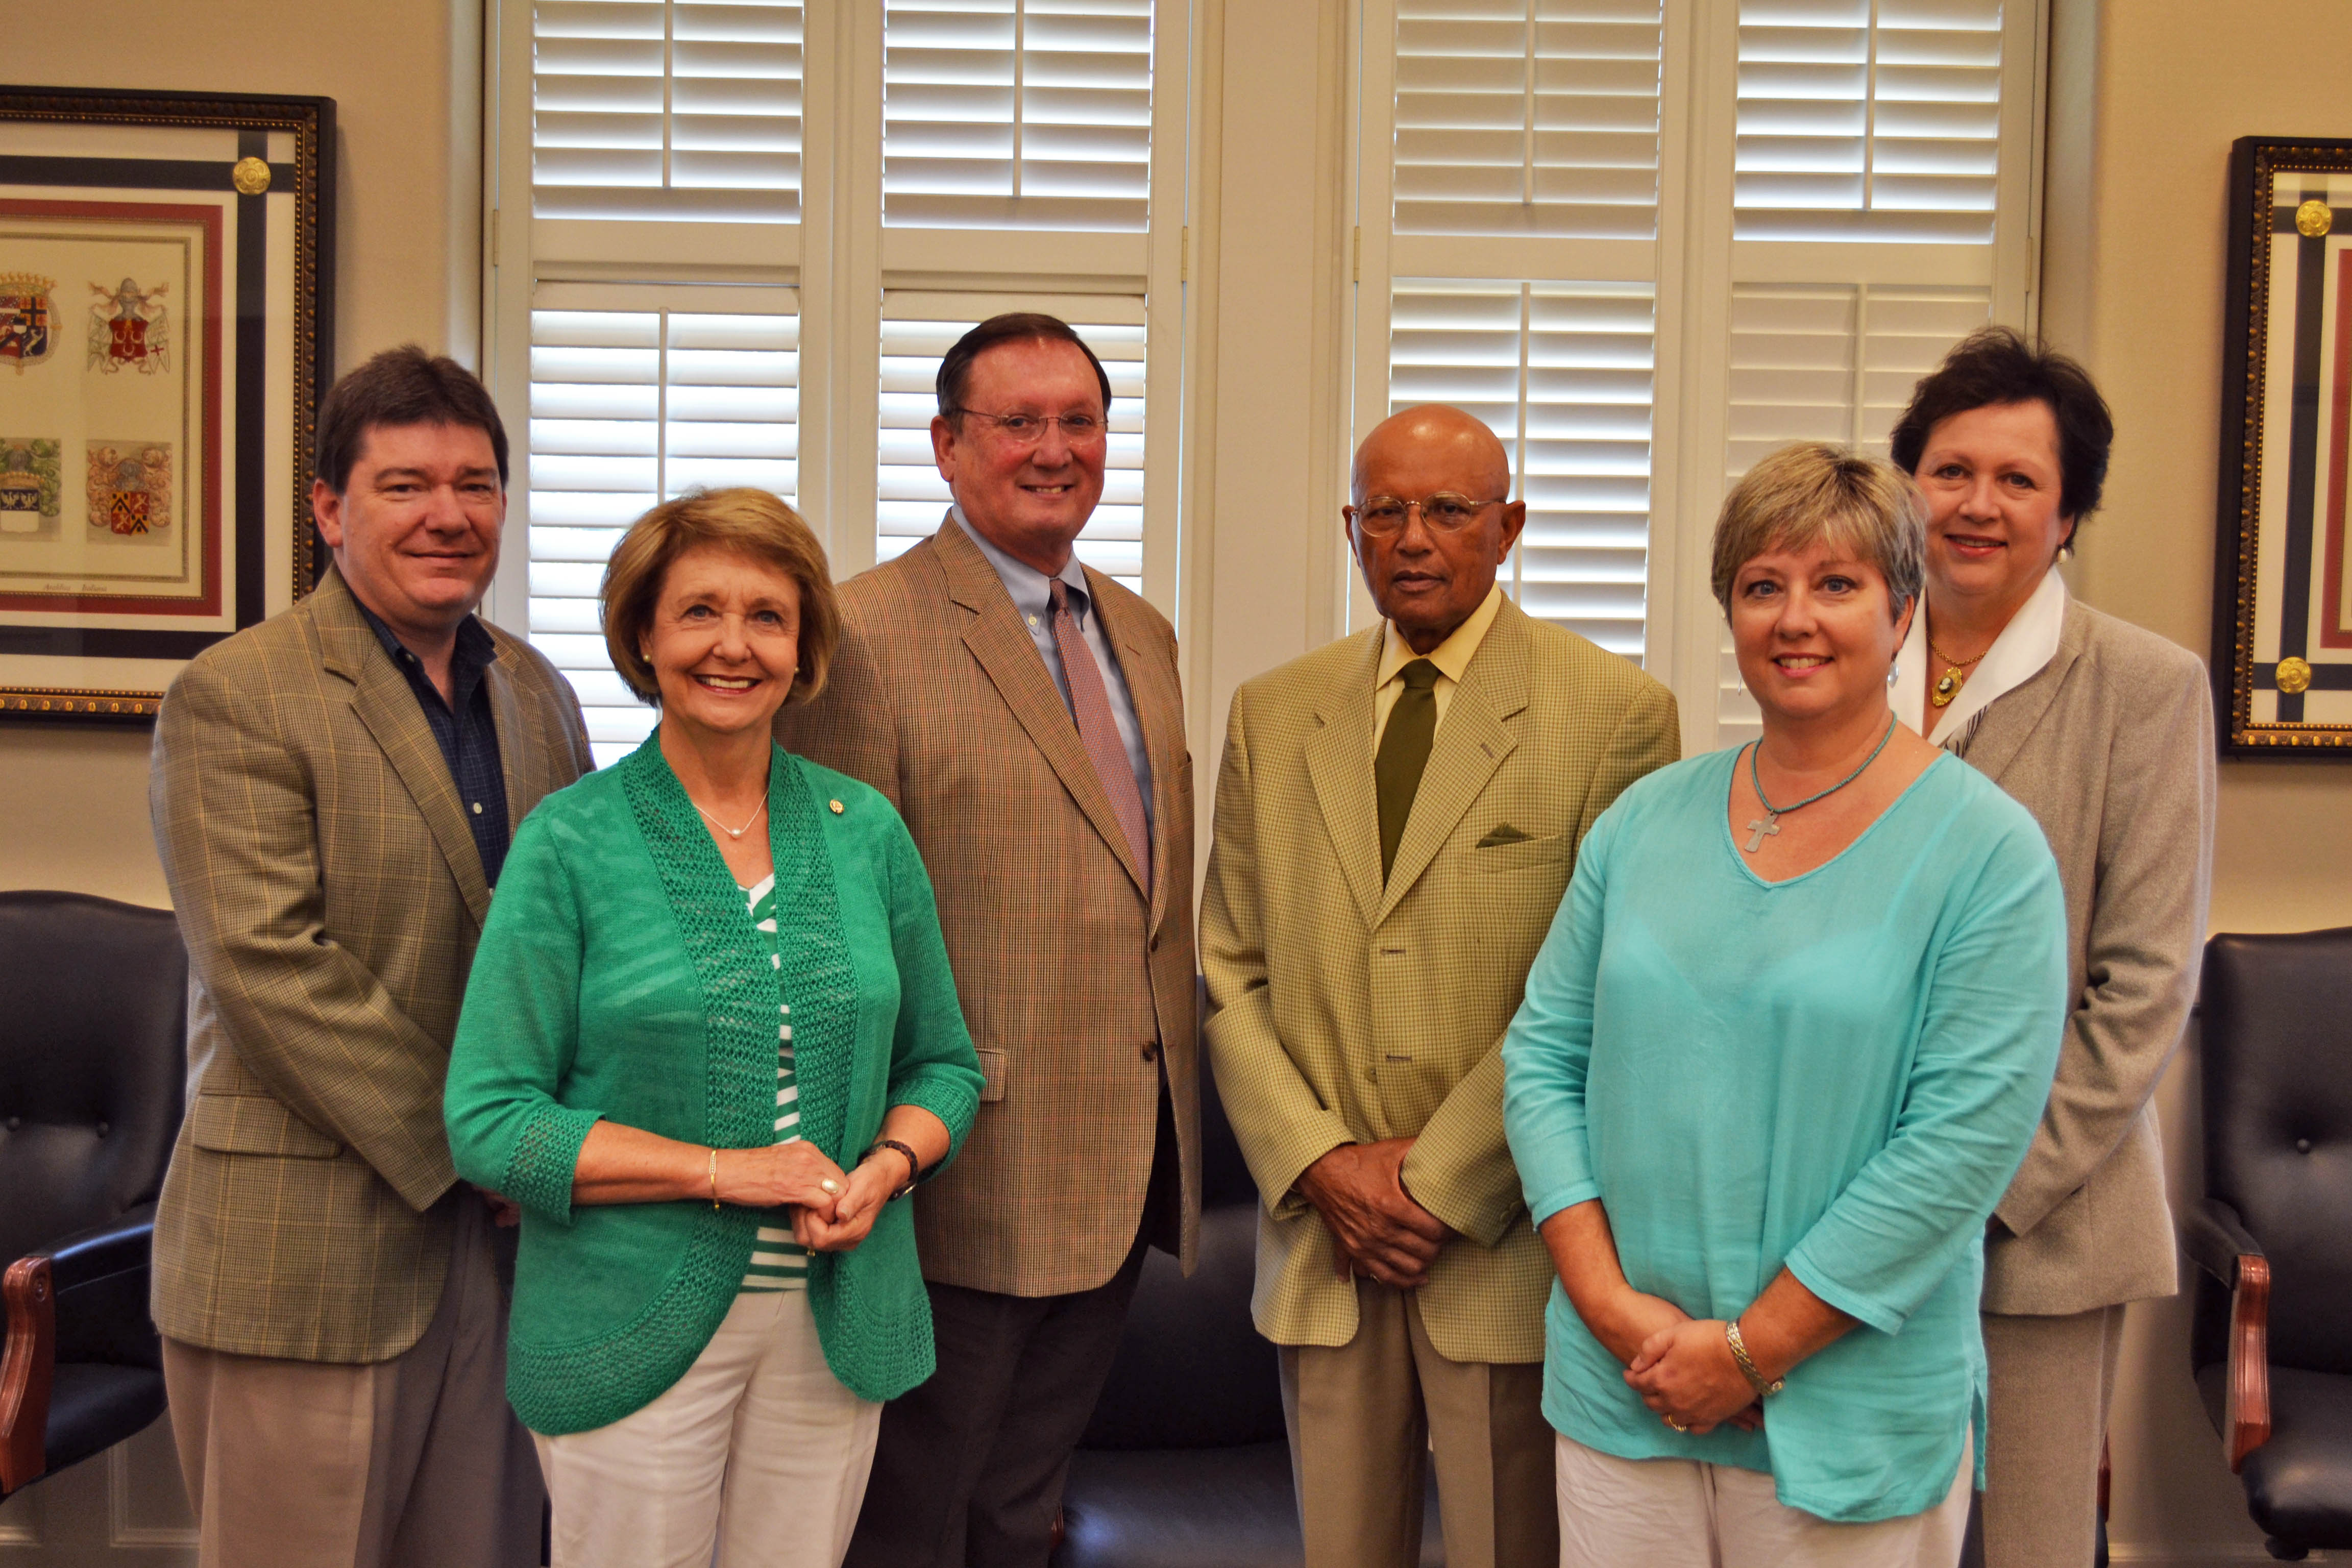 PHOTO:  The advisory board’s members include Vicki Fioranelli, Dr. Cass Pennington, Peter Jernberg, Beverly Johnston, and Dean of the College of Education and Human Sciences, Leslie Griffin. Not pictured is Butch Scipper. Gary Bouse was present as an Alumni Foundation representative. 